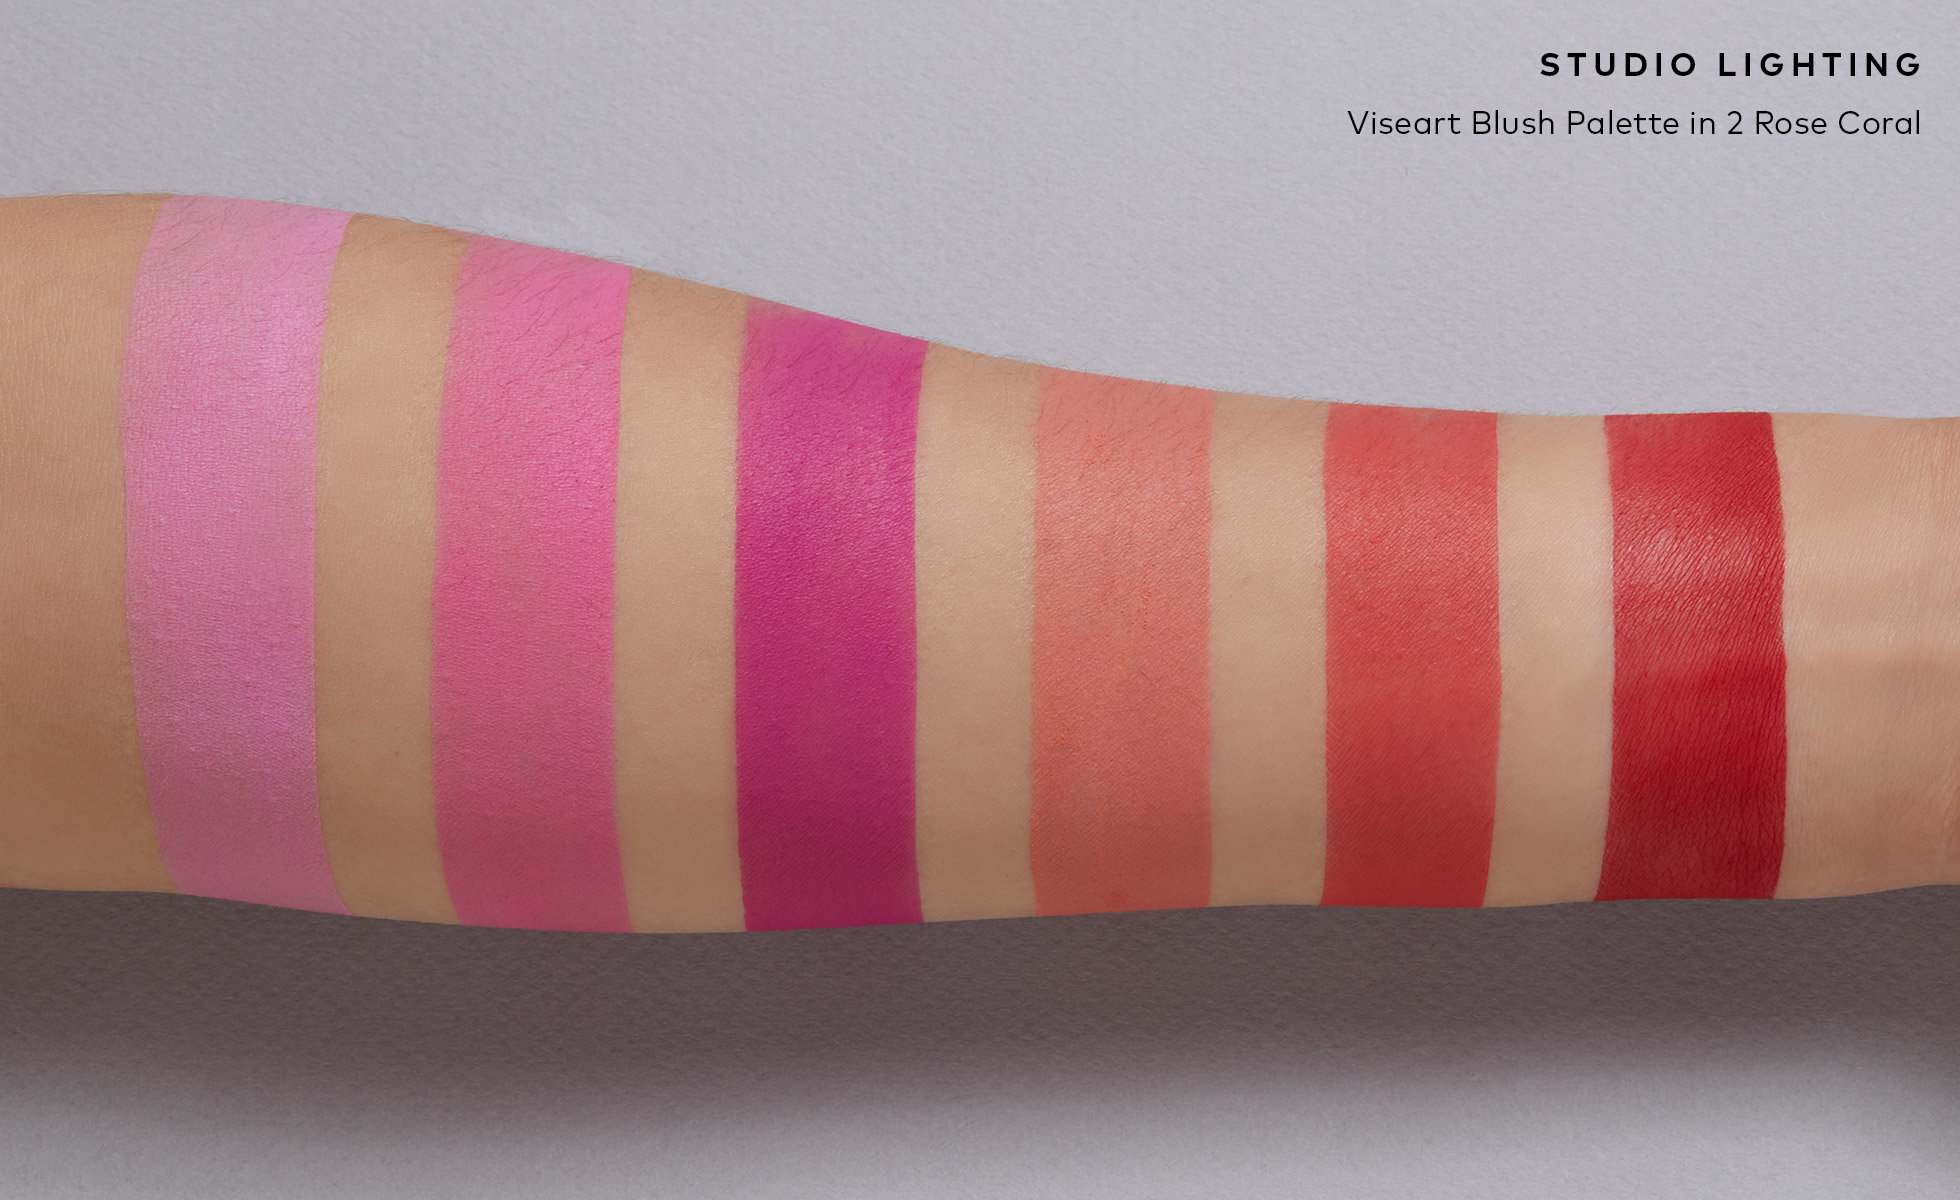 Viseart Blush Palette 2 Rose Coral Arm Swatches in studio lighting